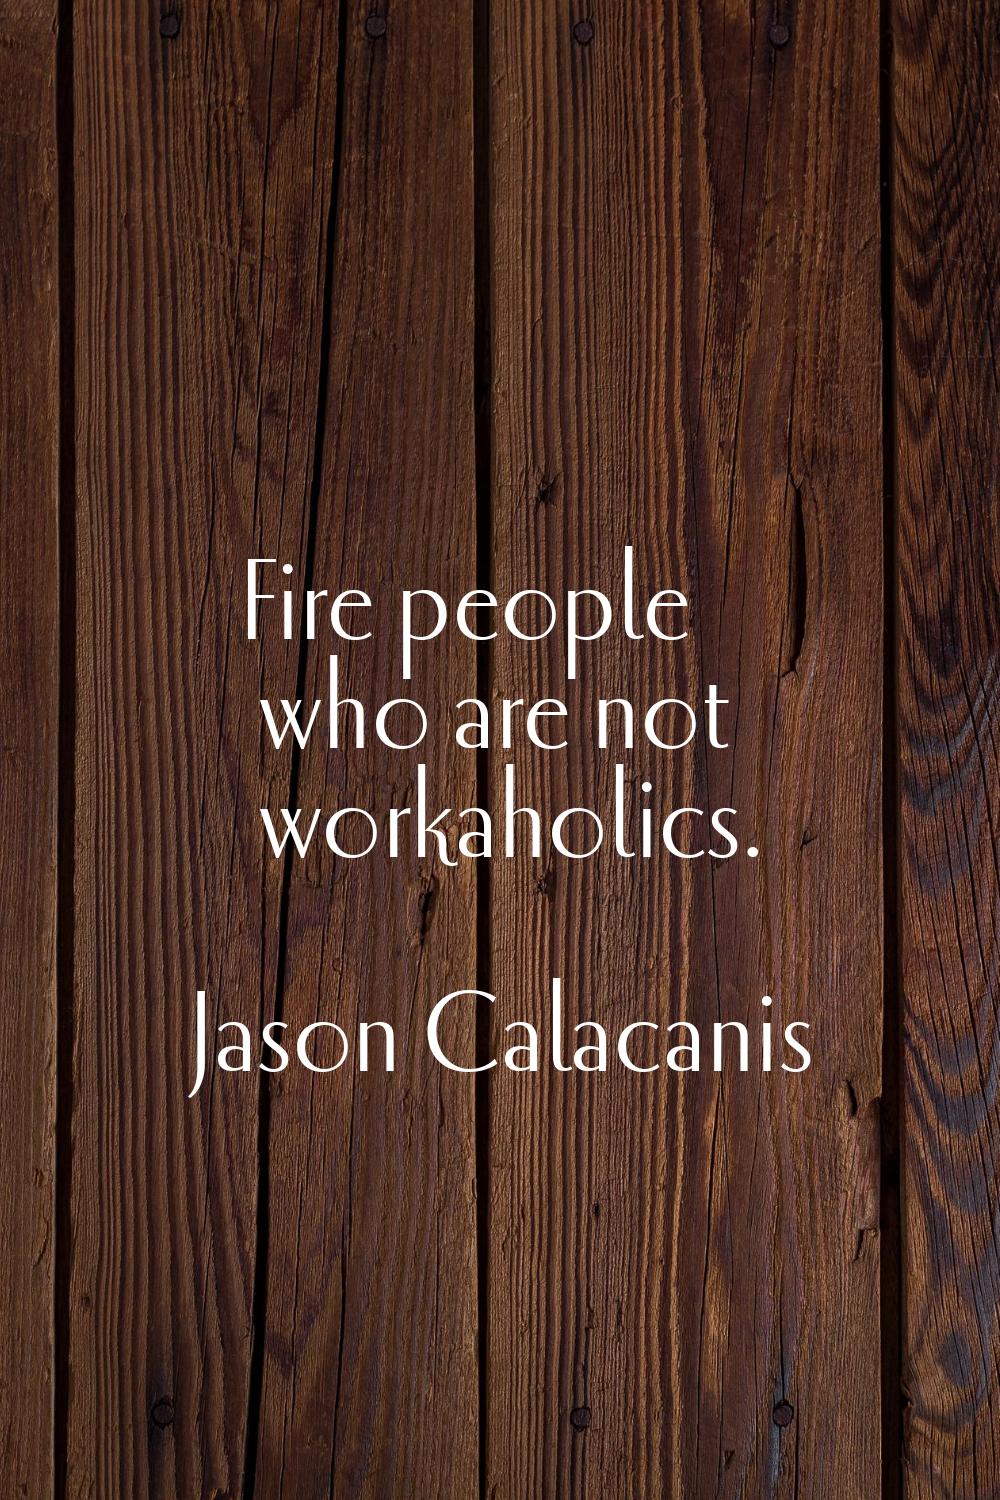 Fire people who are not workaholics.